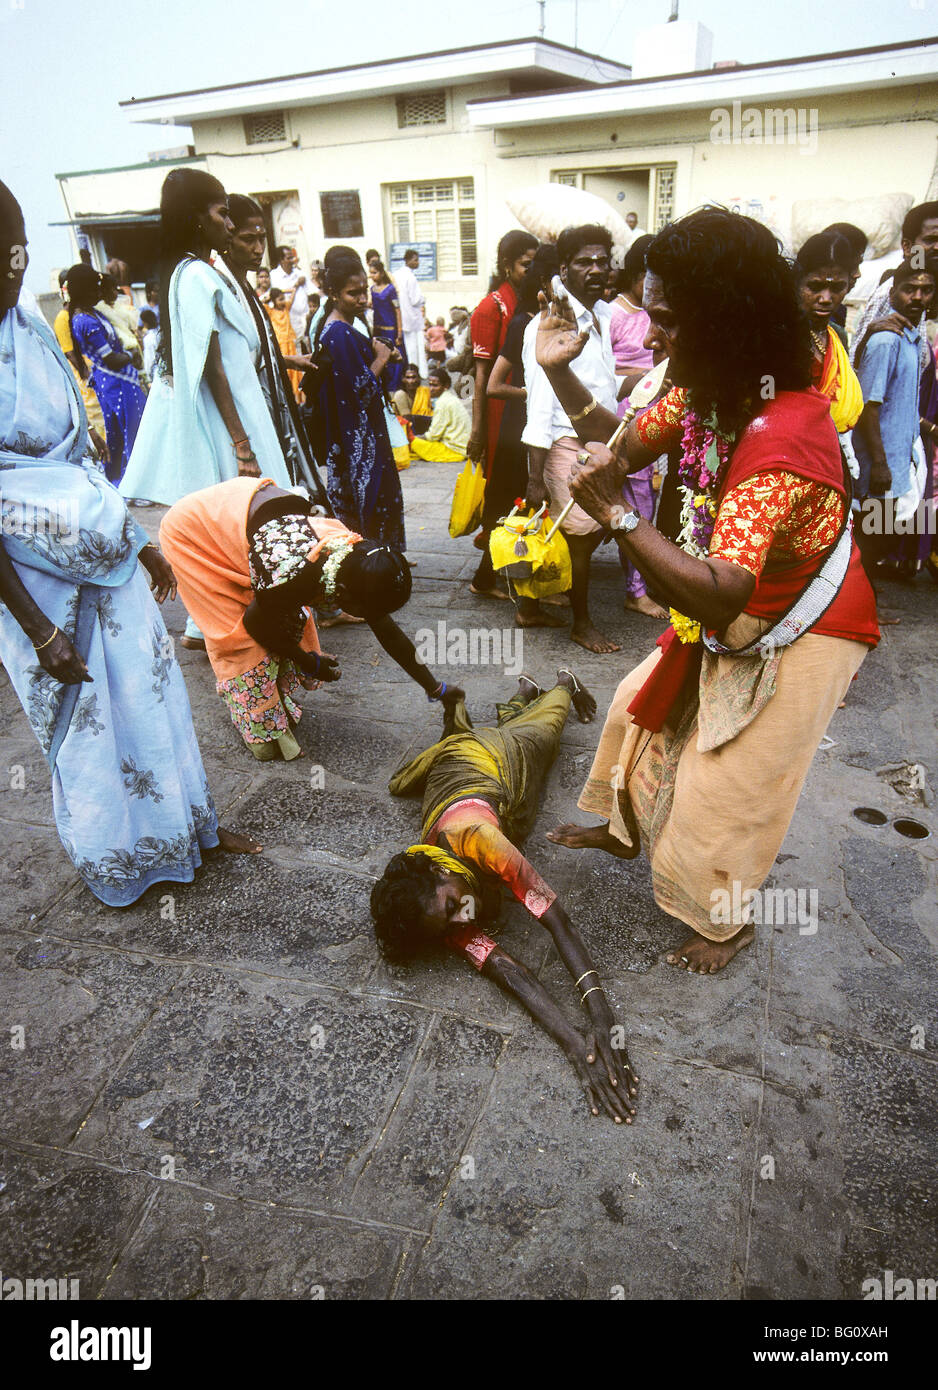 A pilgrim rolls on the ground which is hard pavement completely around the Palani Murugan Temple holding a coconut during the annual Hindu Thaipusam festival. She is assisted by family members and a female saddhu who occasionally give her water. This is a form of kavadi which is an act of devotion represented by the hardship and pain she is experiencing. Stock Photo